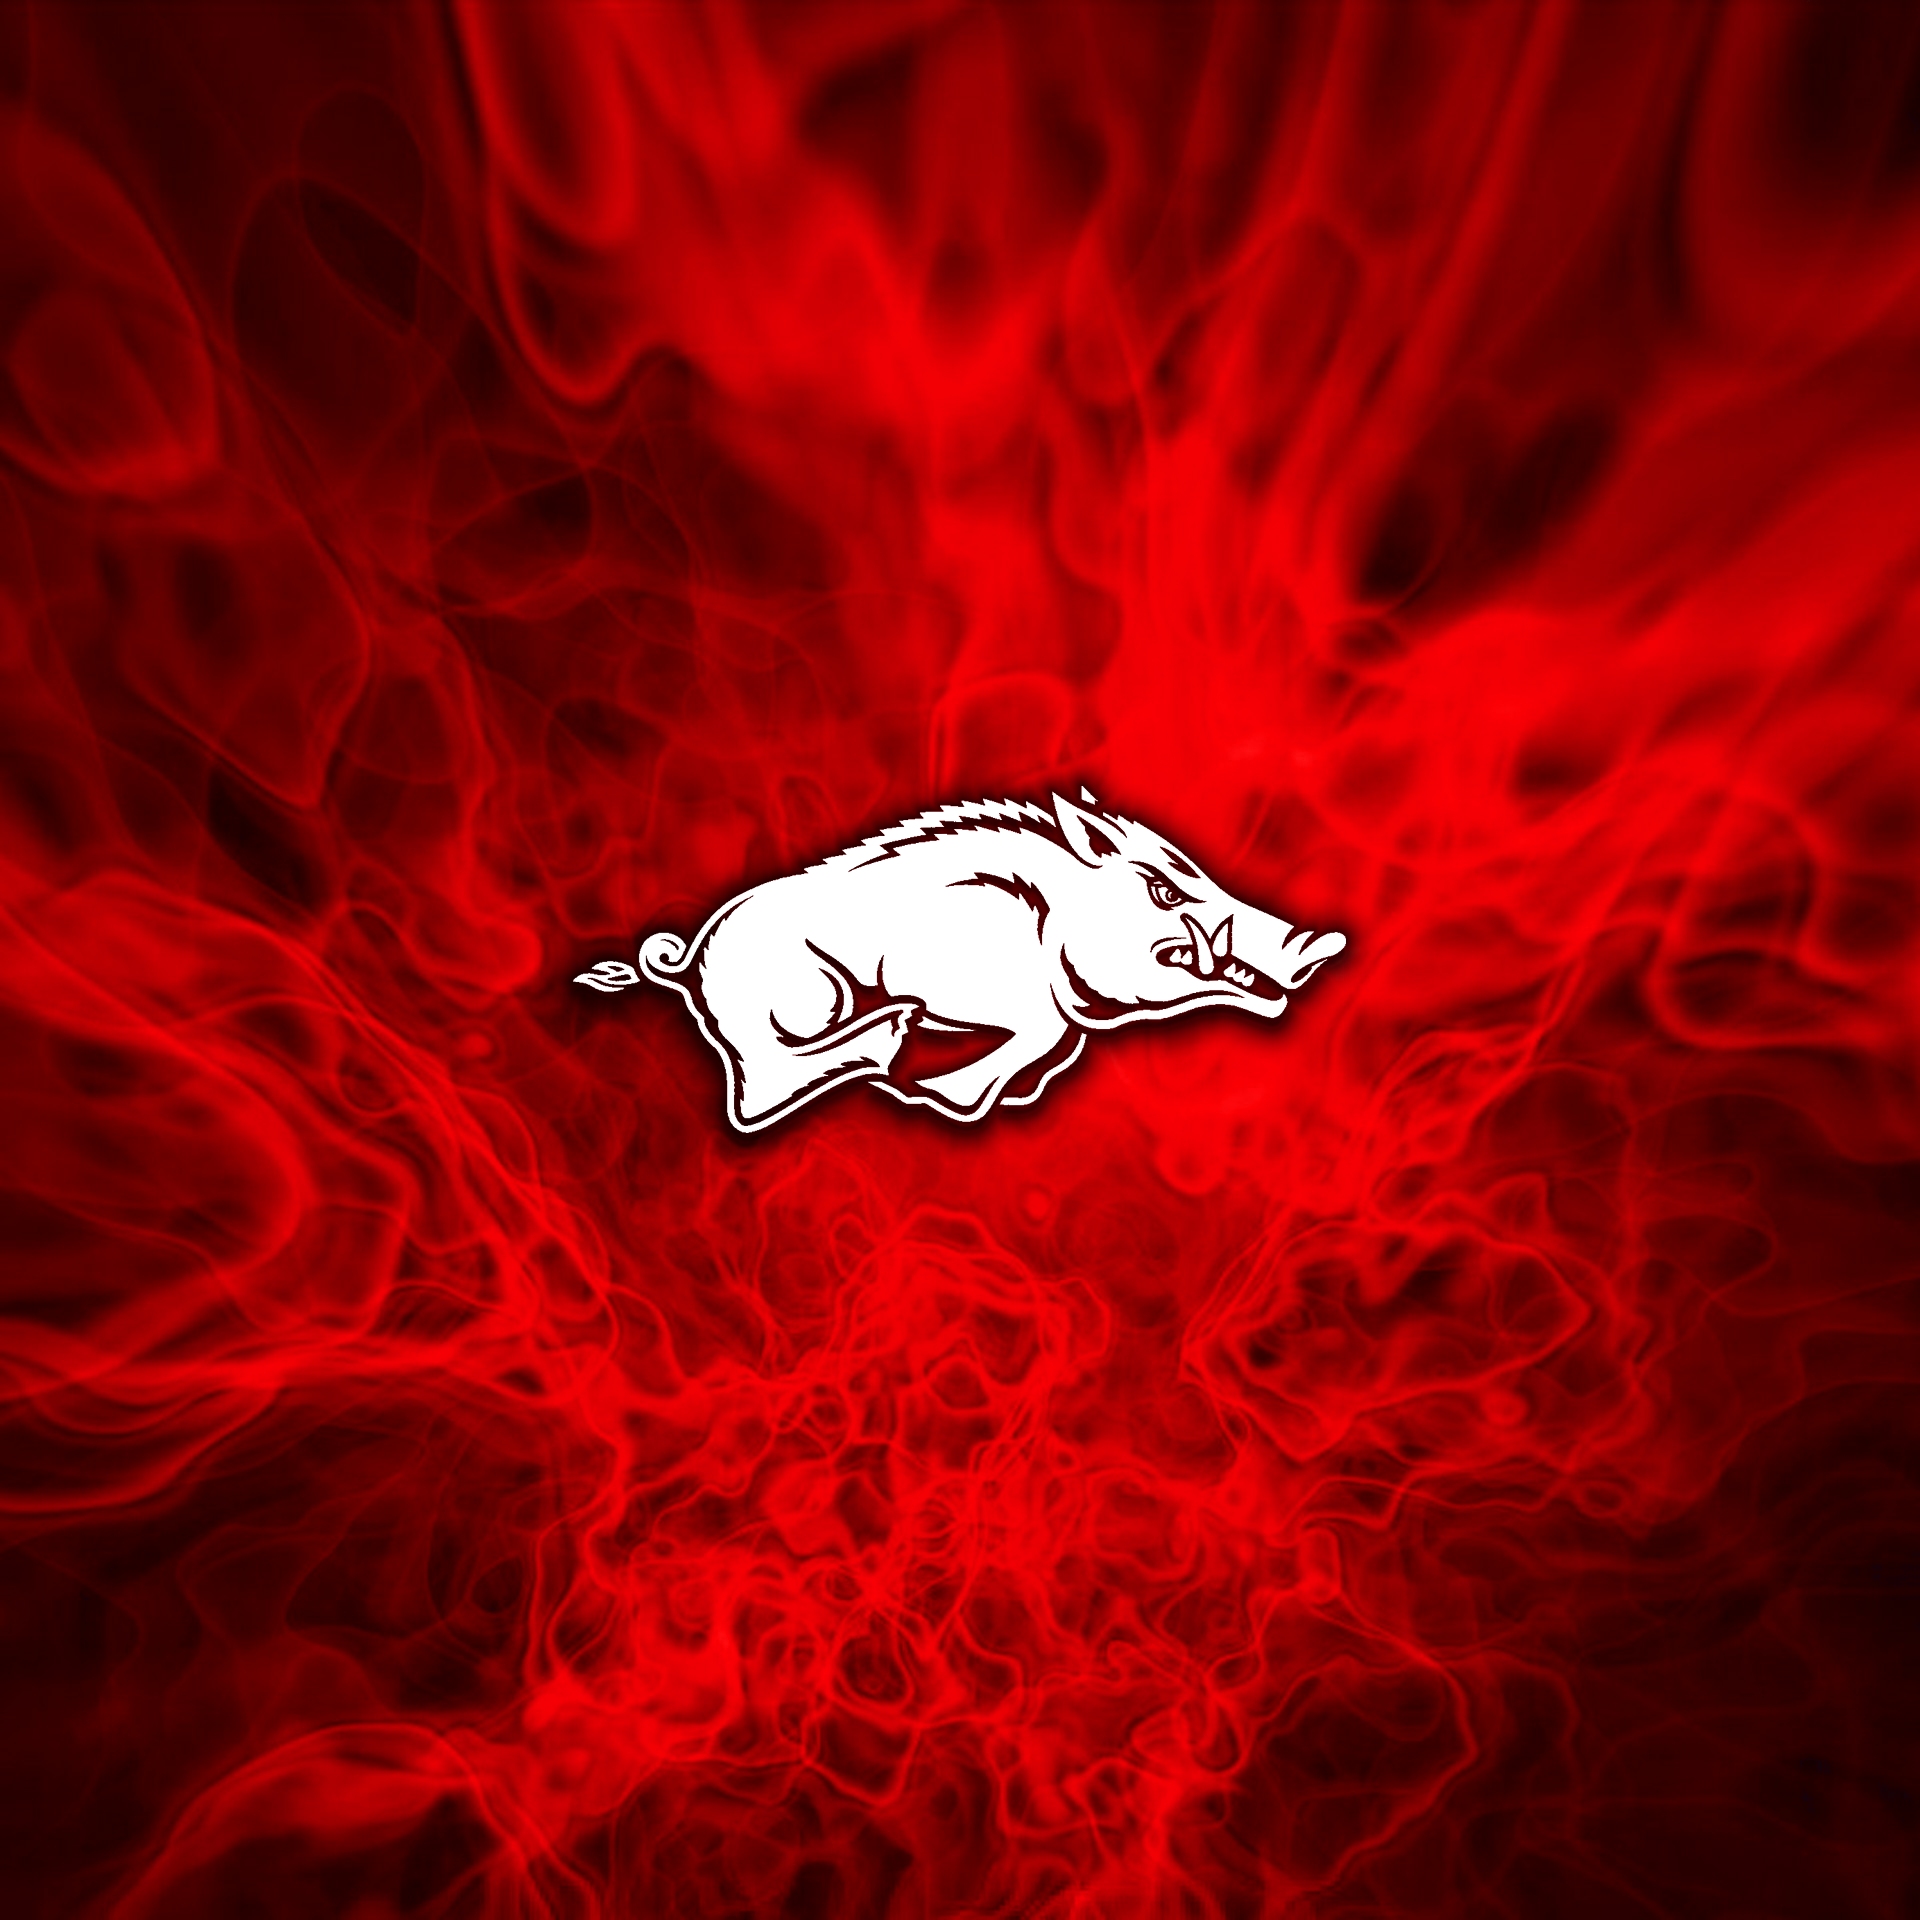 Get a Set of 12 Officially NCAA Licensed Arkansas Razorbacks iPhone  Wallpapers sized precisely for an  Arkansas razorbacks Arkansas Arkansas  razorbacks football